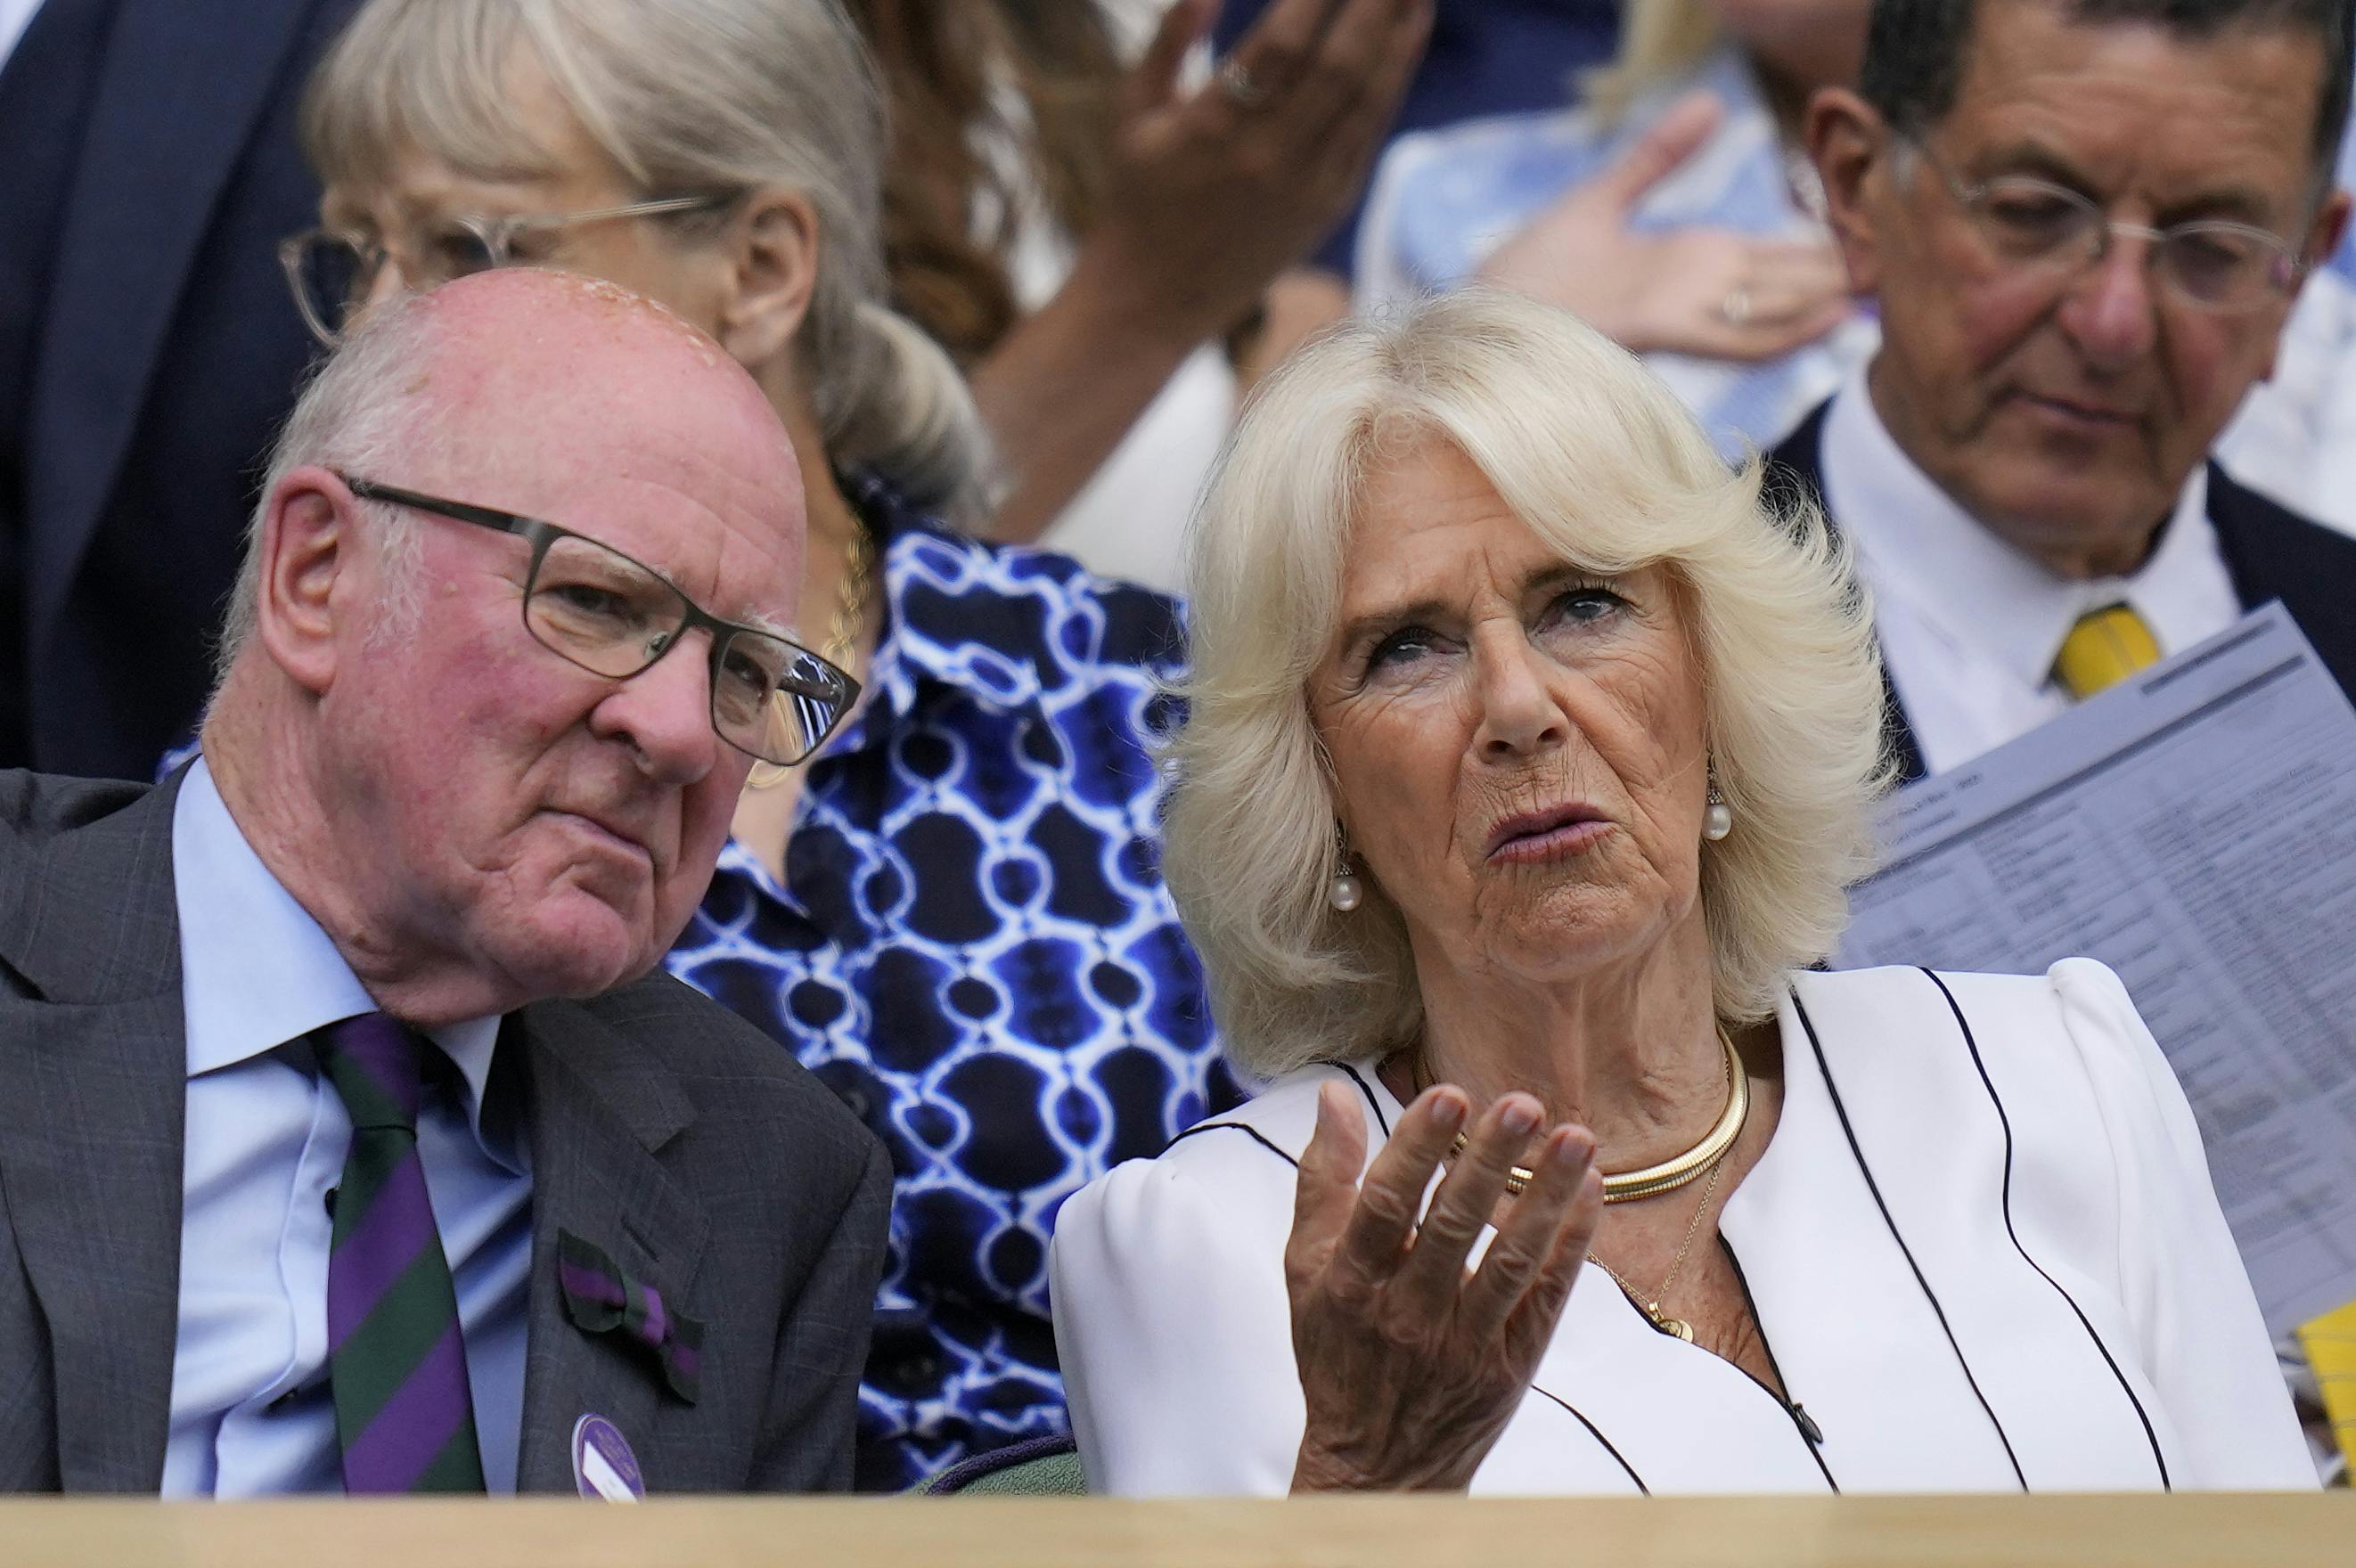 Dronning Camilla har fået en plads ved siden af Ian Hewitt, som er formand for The All England Lawn Tennis and Croquet Club (AELTC).&nbsp;
